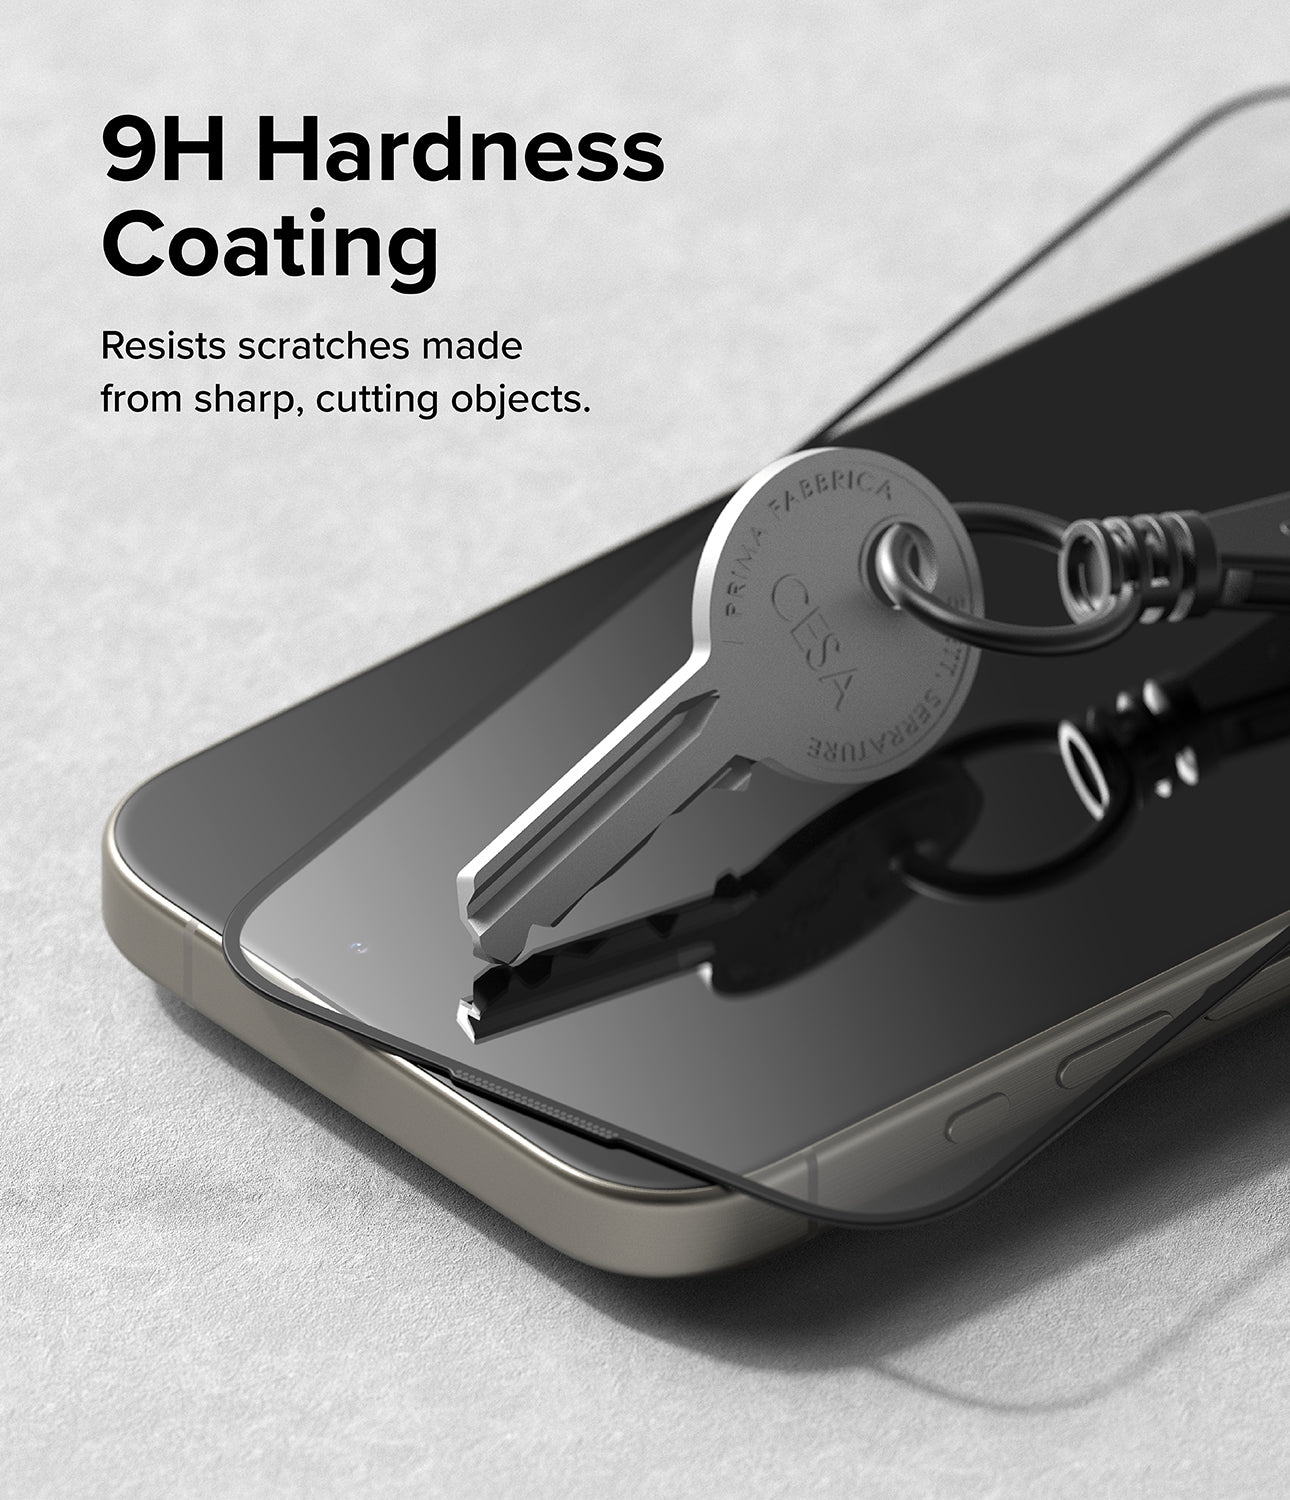 iPhone 15 Pro Max Screen Protector | Easy Slide Tempered Glass - 9H Hardness Coating. Resists scratches made from sharp, cutting objects.